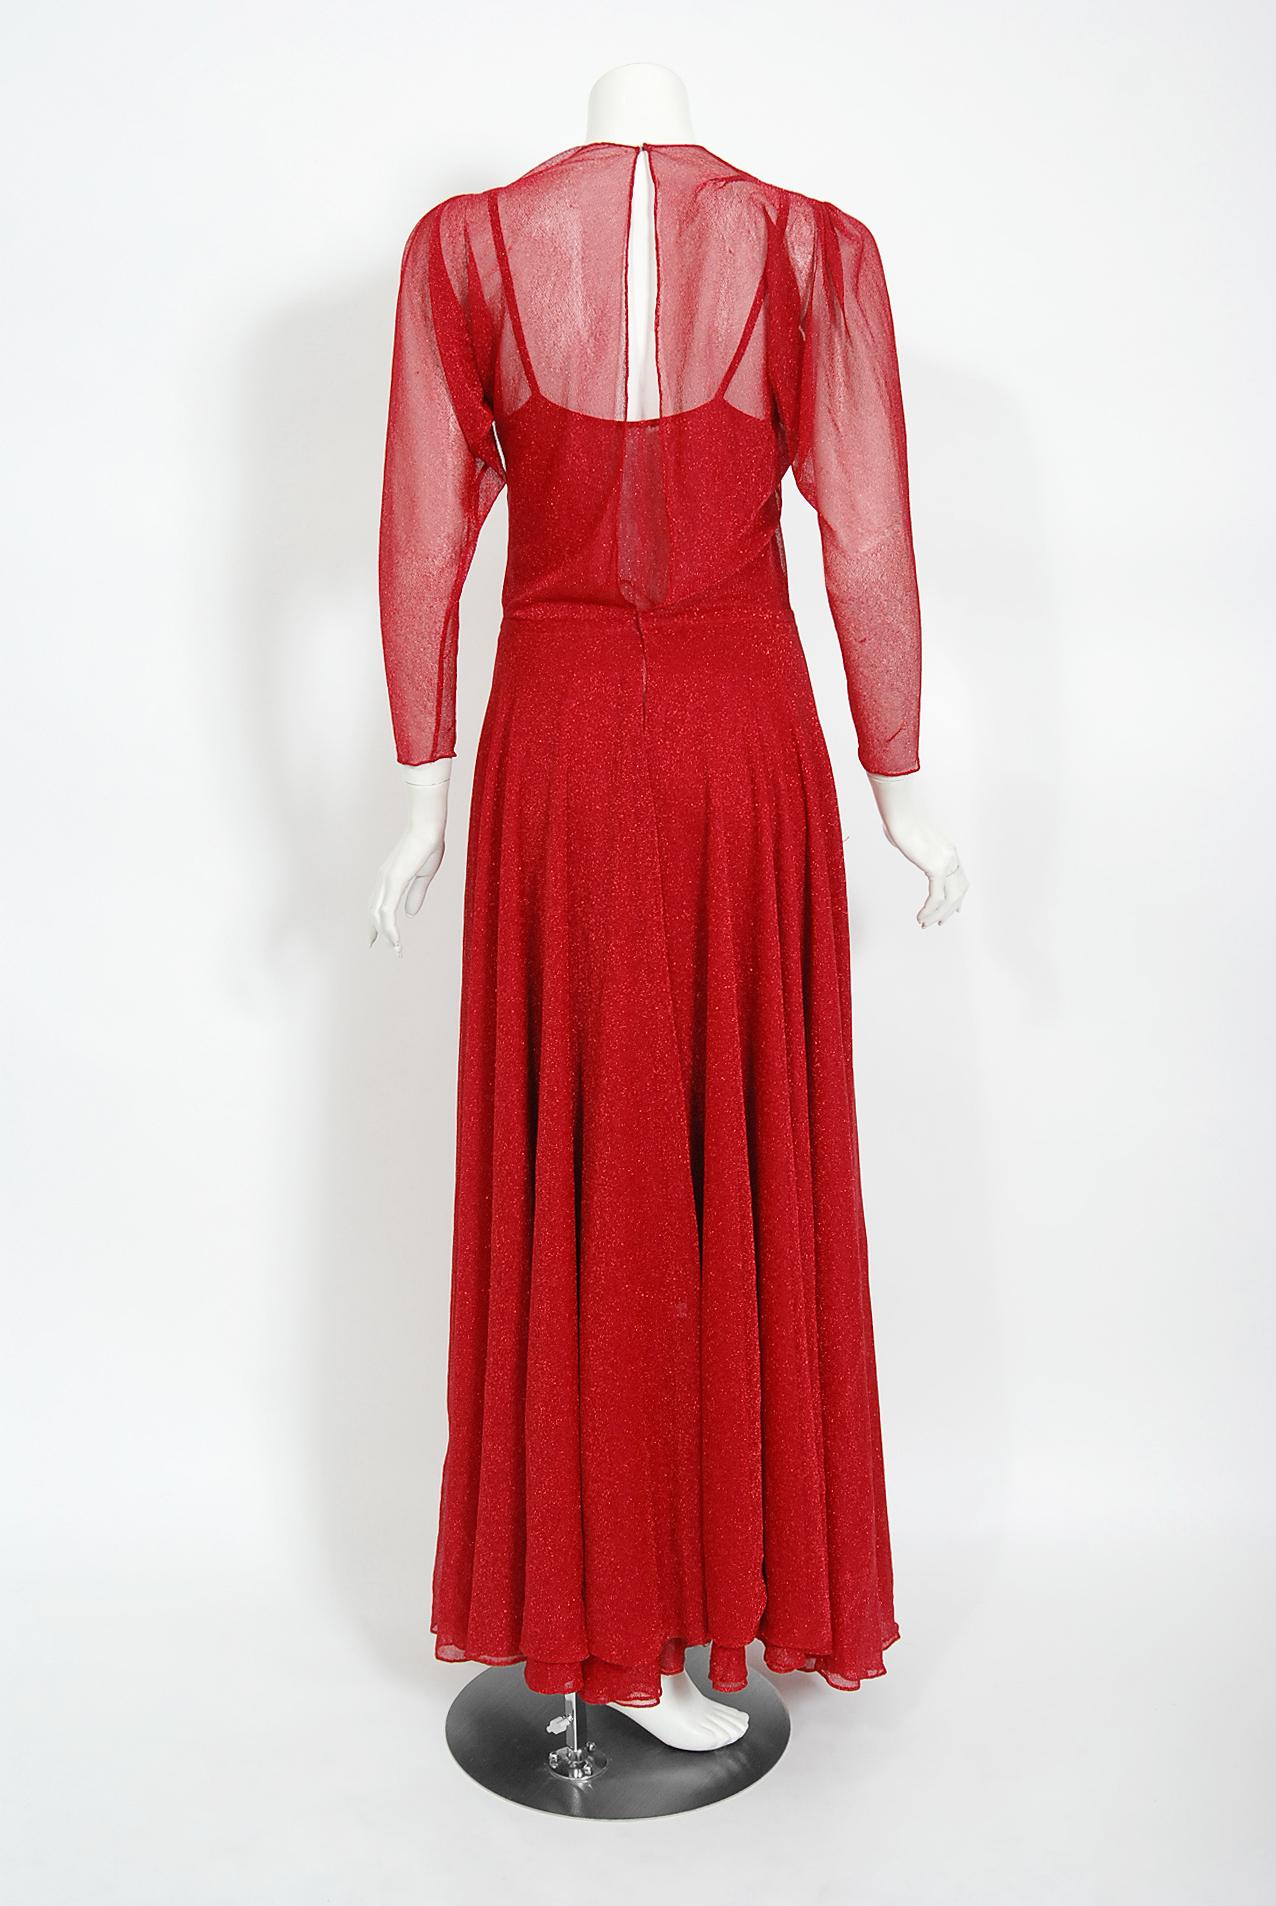 1970's Halston Couture Metallic Red Sheer Lurex Knit Long-Sleeve Maxi Dress Gown For Sale 3